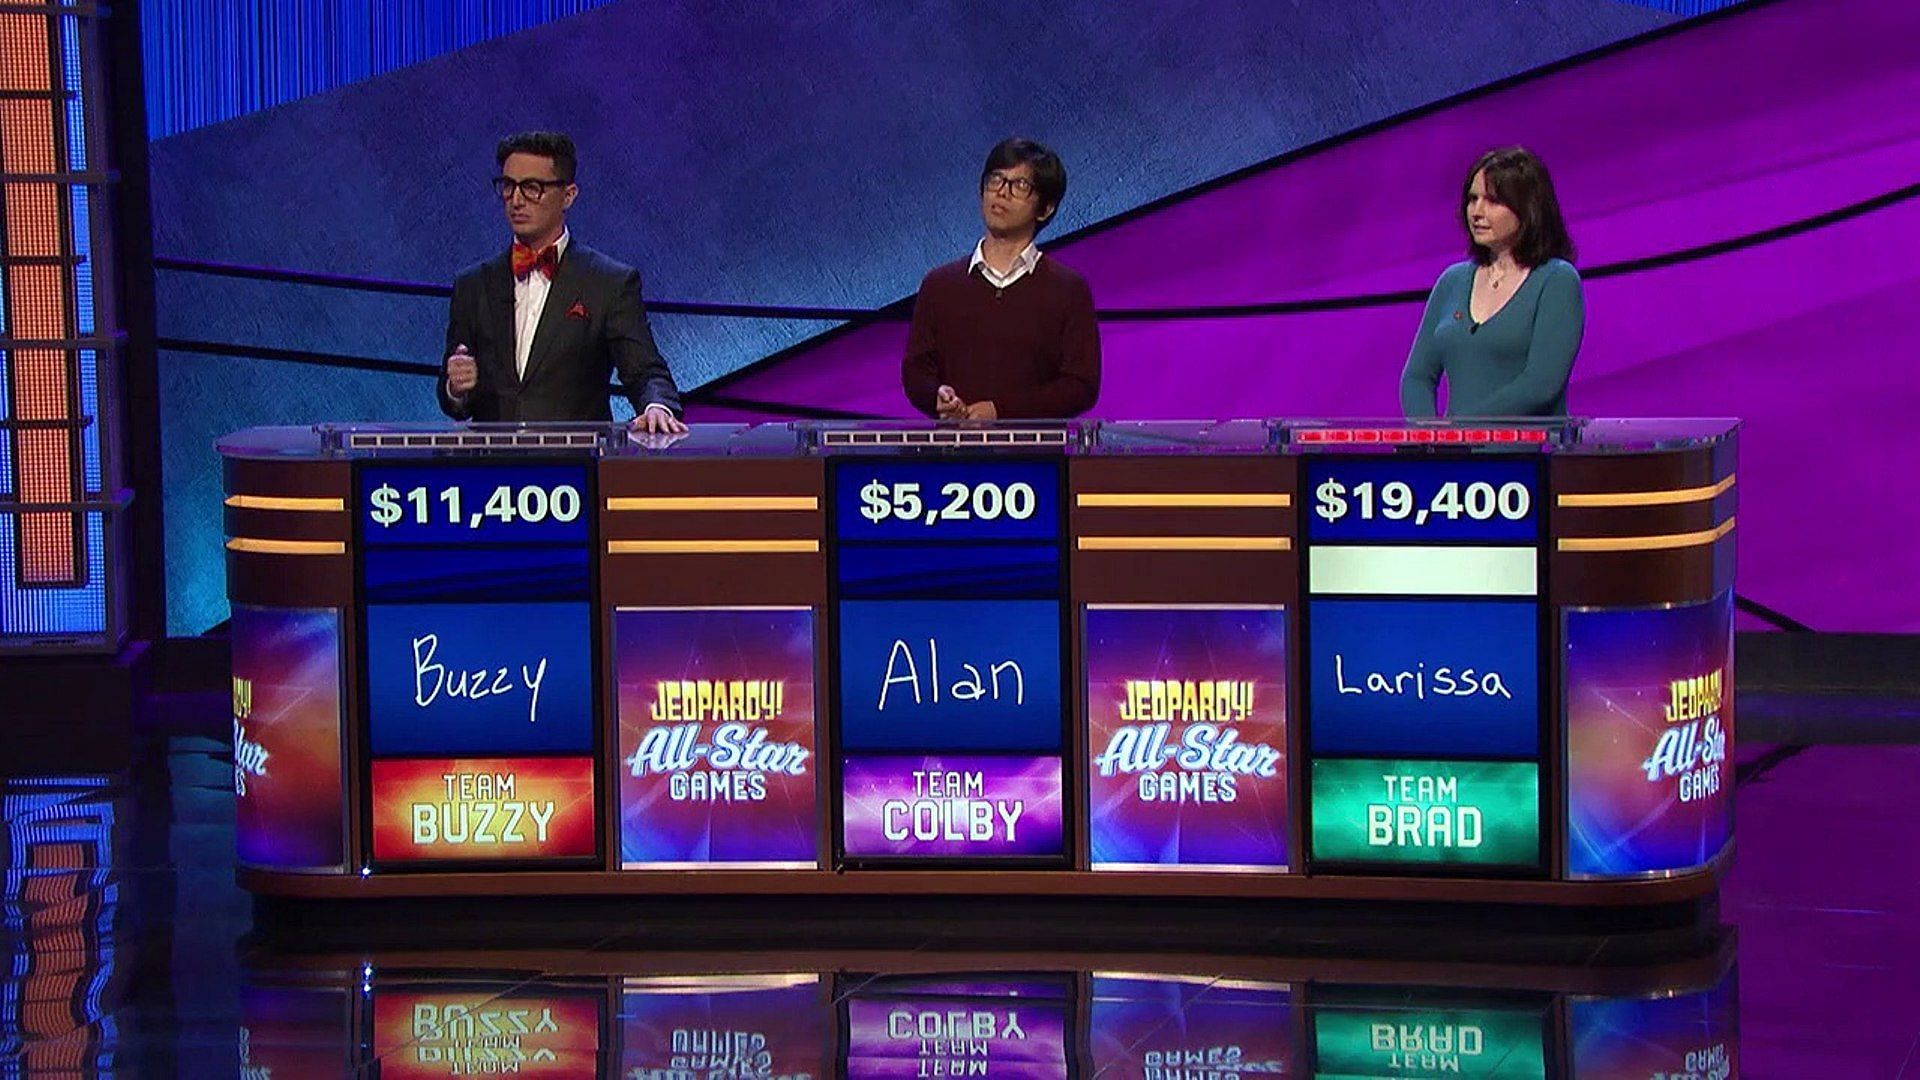 Today's Final Jeopardy! question, answer & contestants June 28, 2022